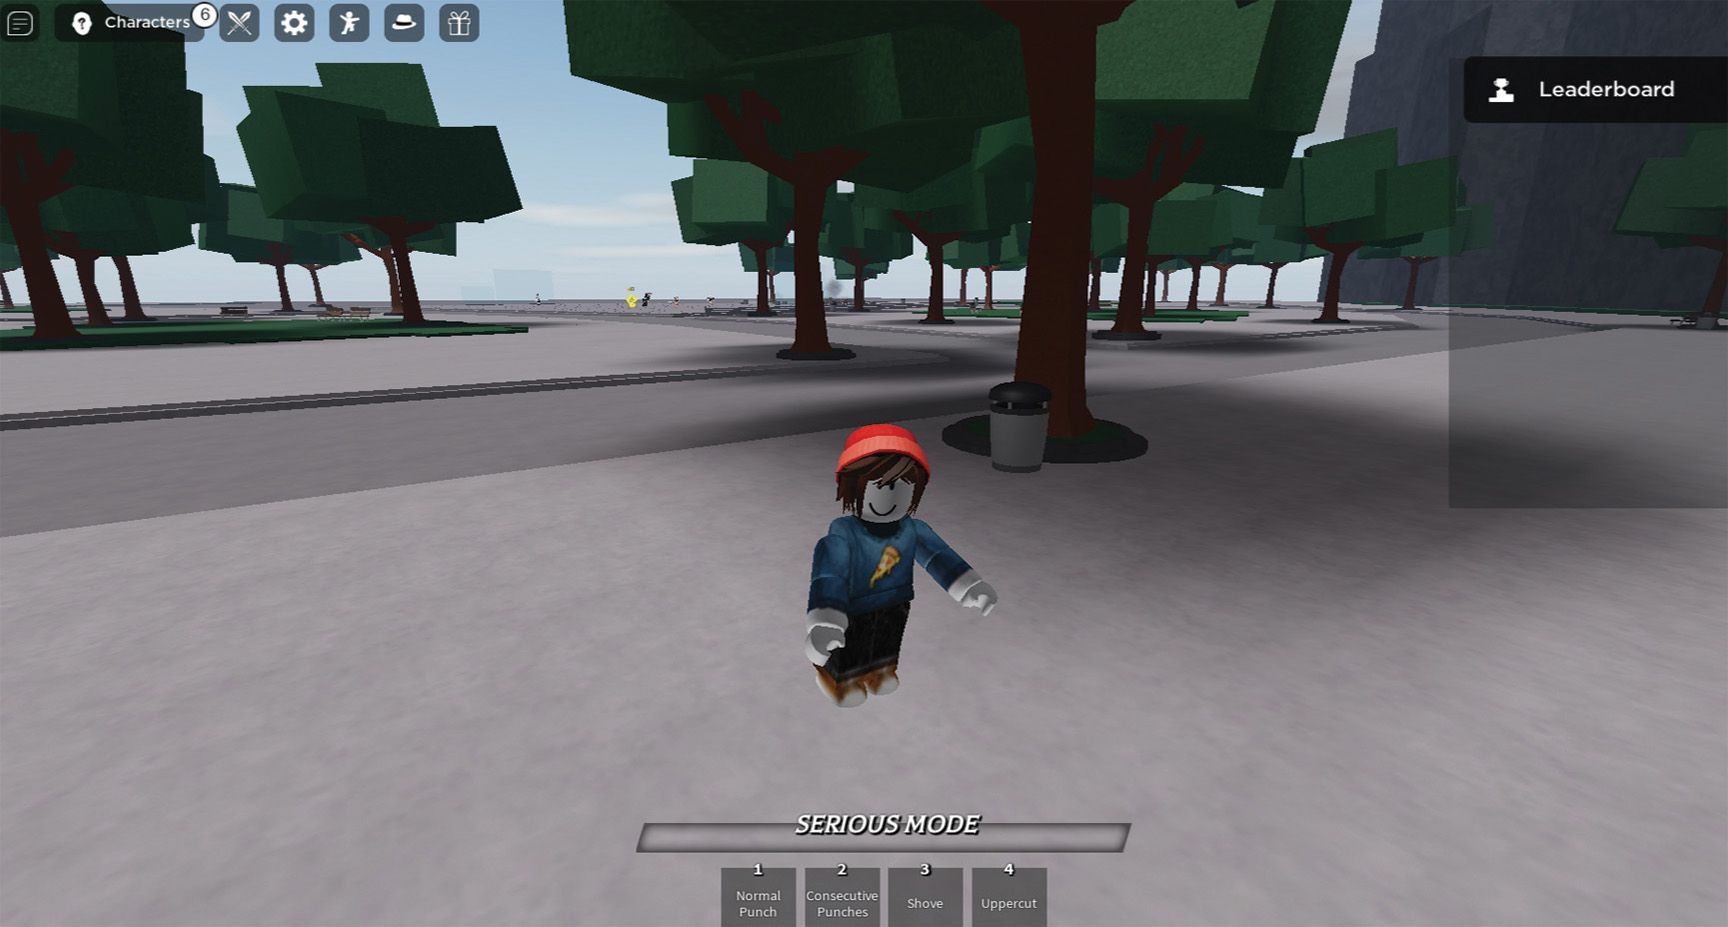 How To Get Emotes In Roblox: The Strongest Battlegrounds